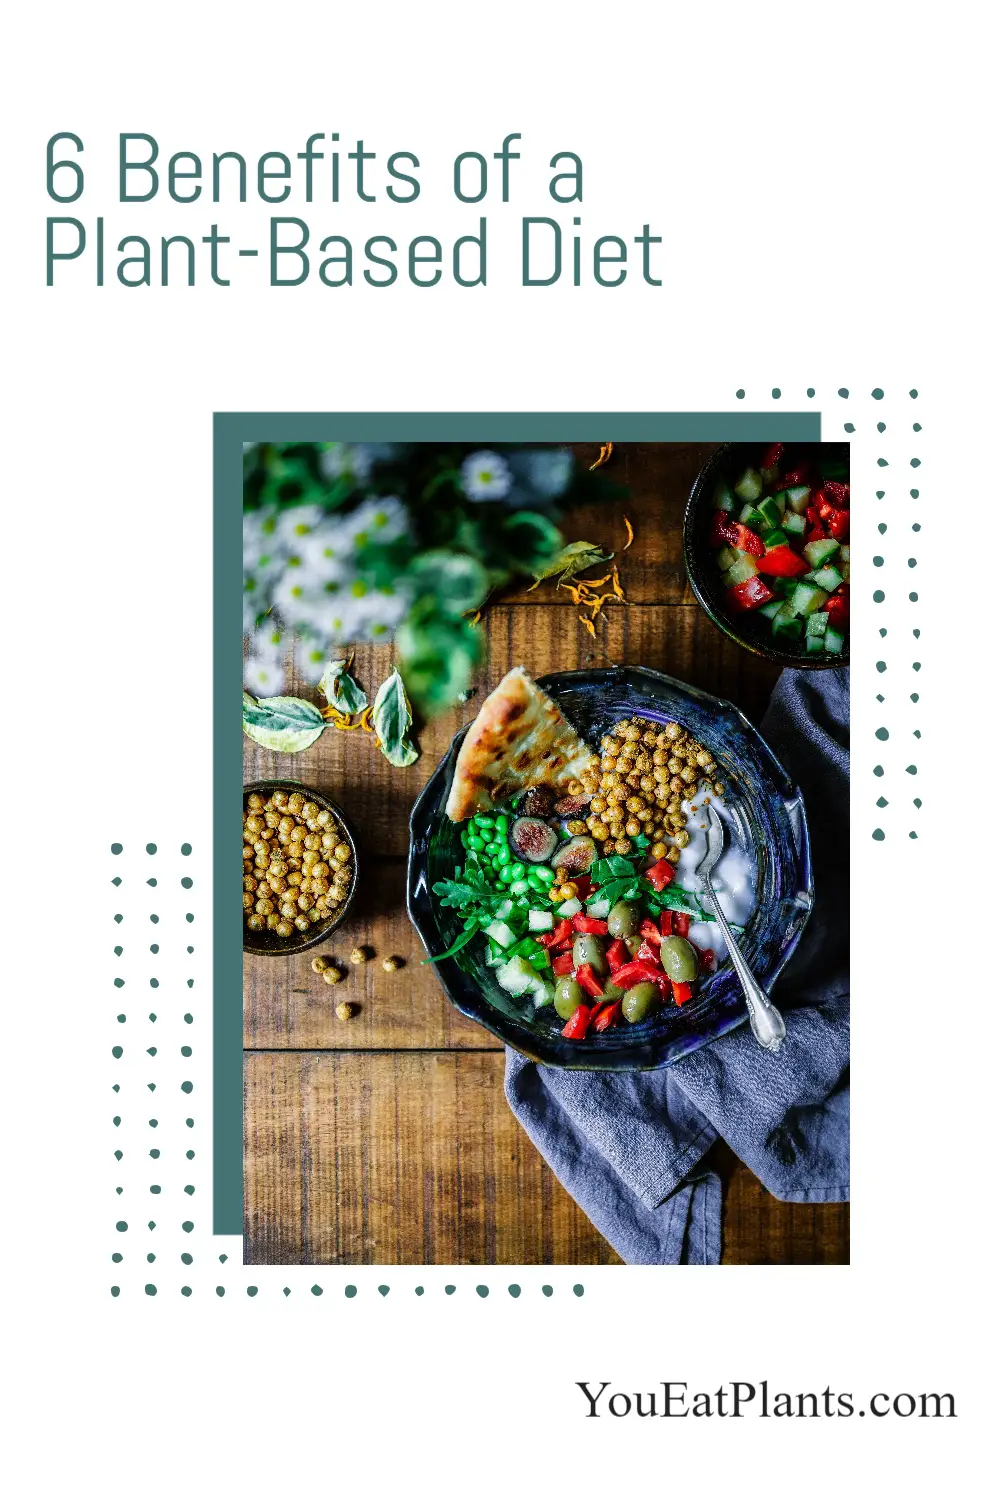 Benefits of a Plant-based Diet for health, athletes, environment